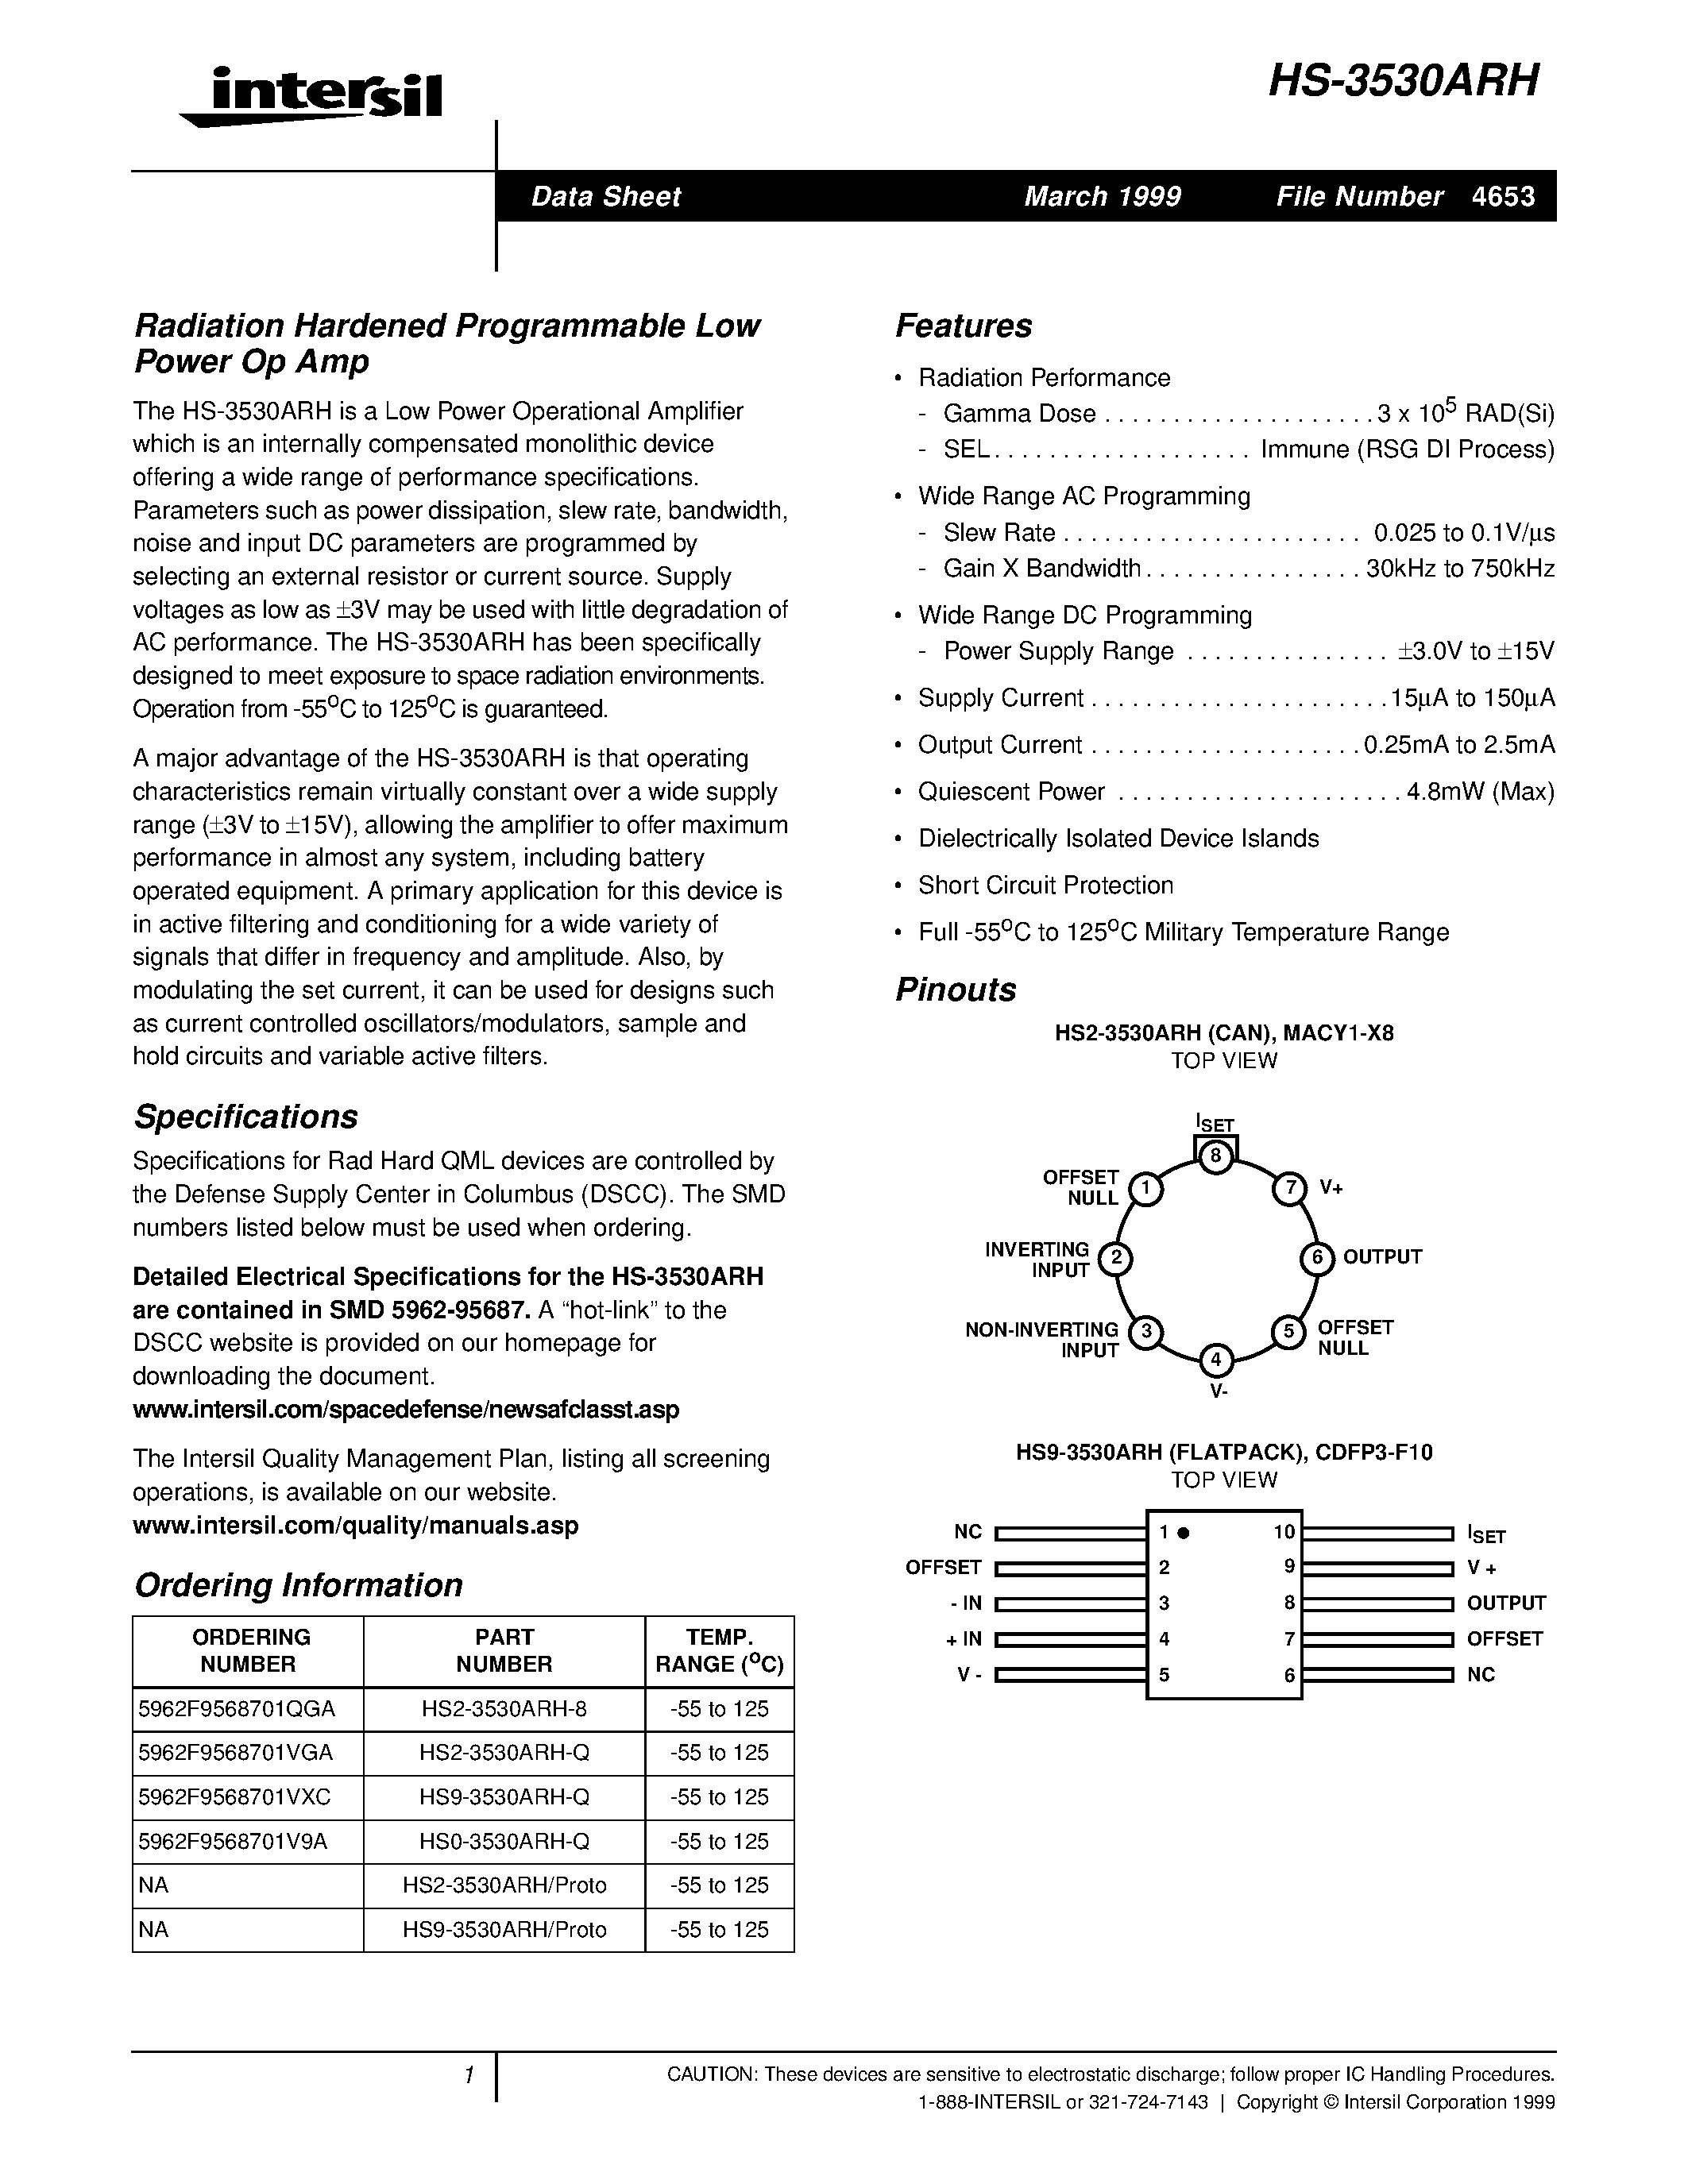 Datasheet HS9-3530ARH-Q - Radiation Hardened Programmable Low Power Op Amp page 1